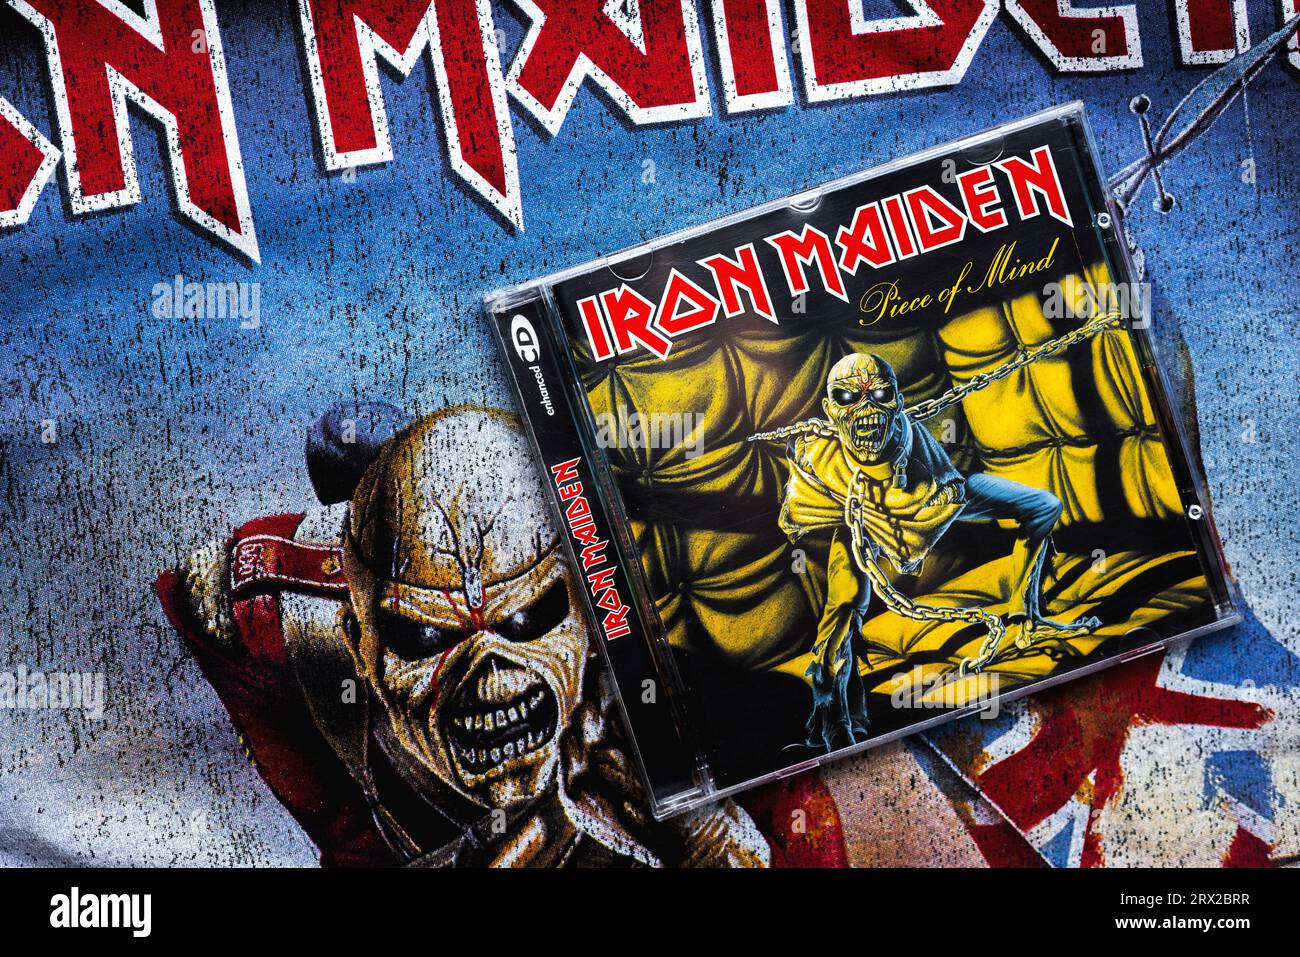 Close-up of cover of Piece of mind CD of Iron Maiden over on a T-shirt with the Iron Maiden logo. Iron Maiden is a British heavy metal band Stock Photo